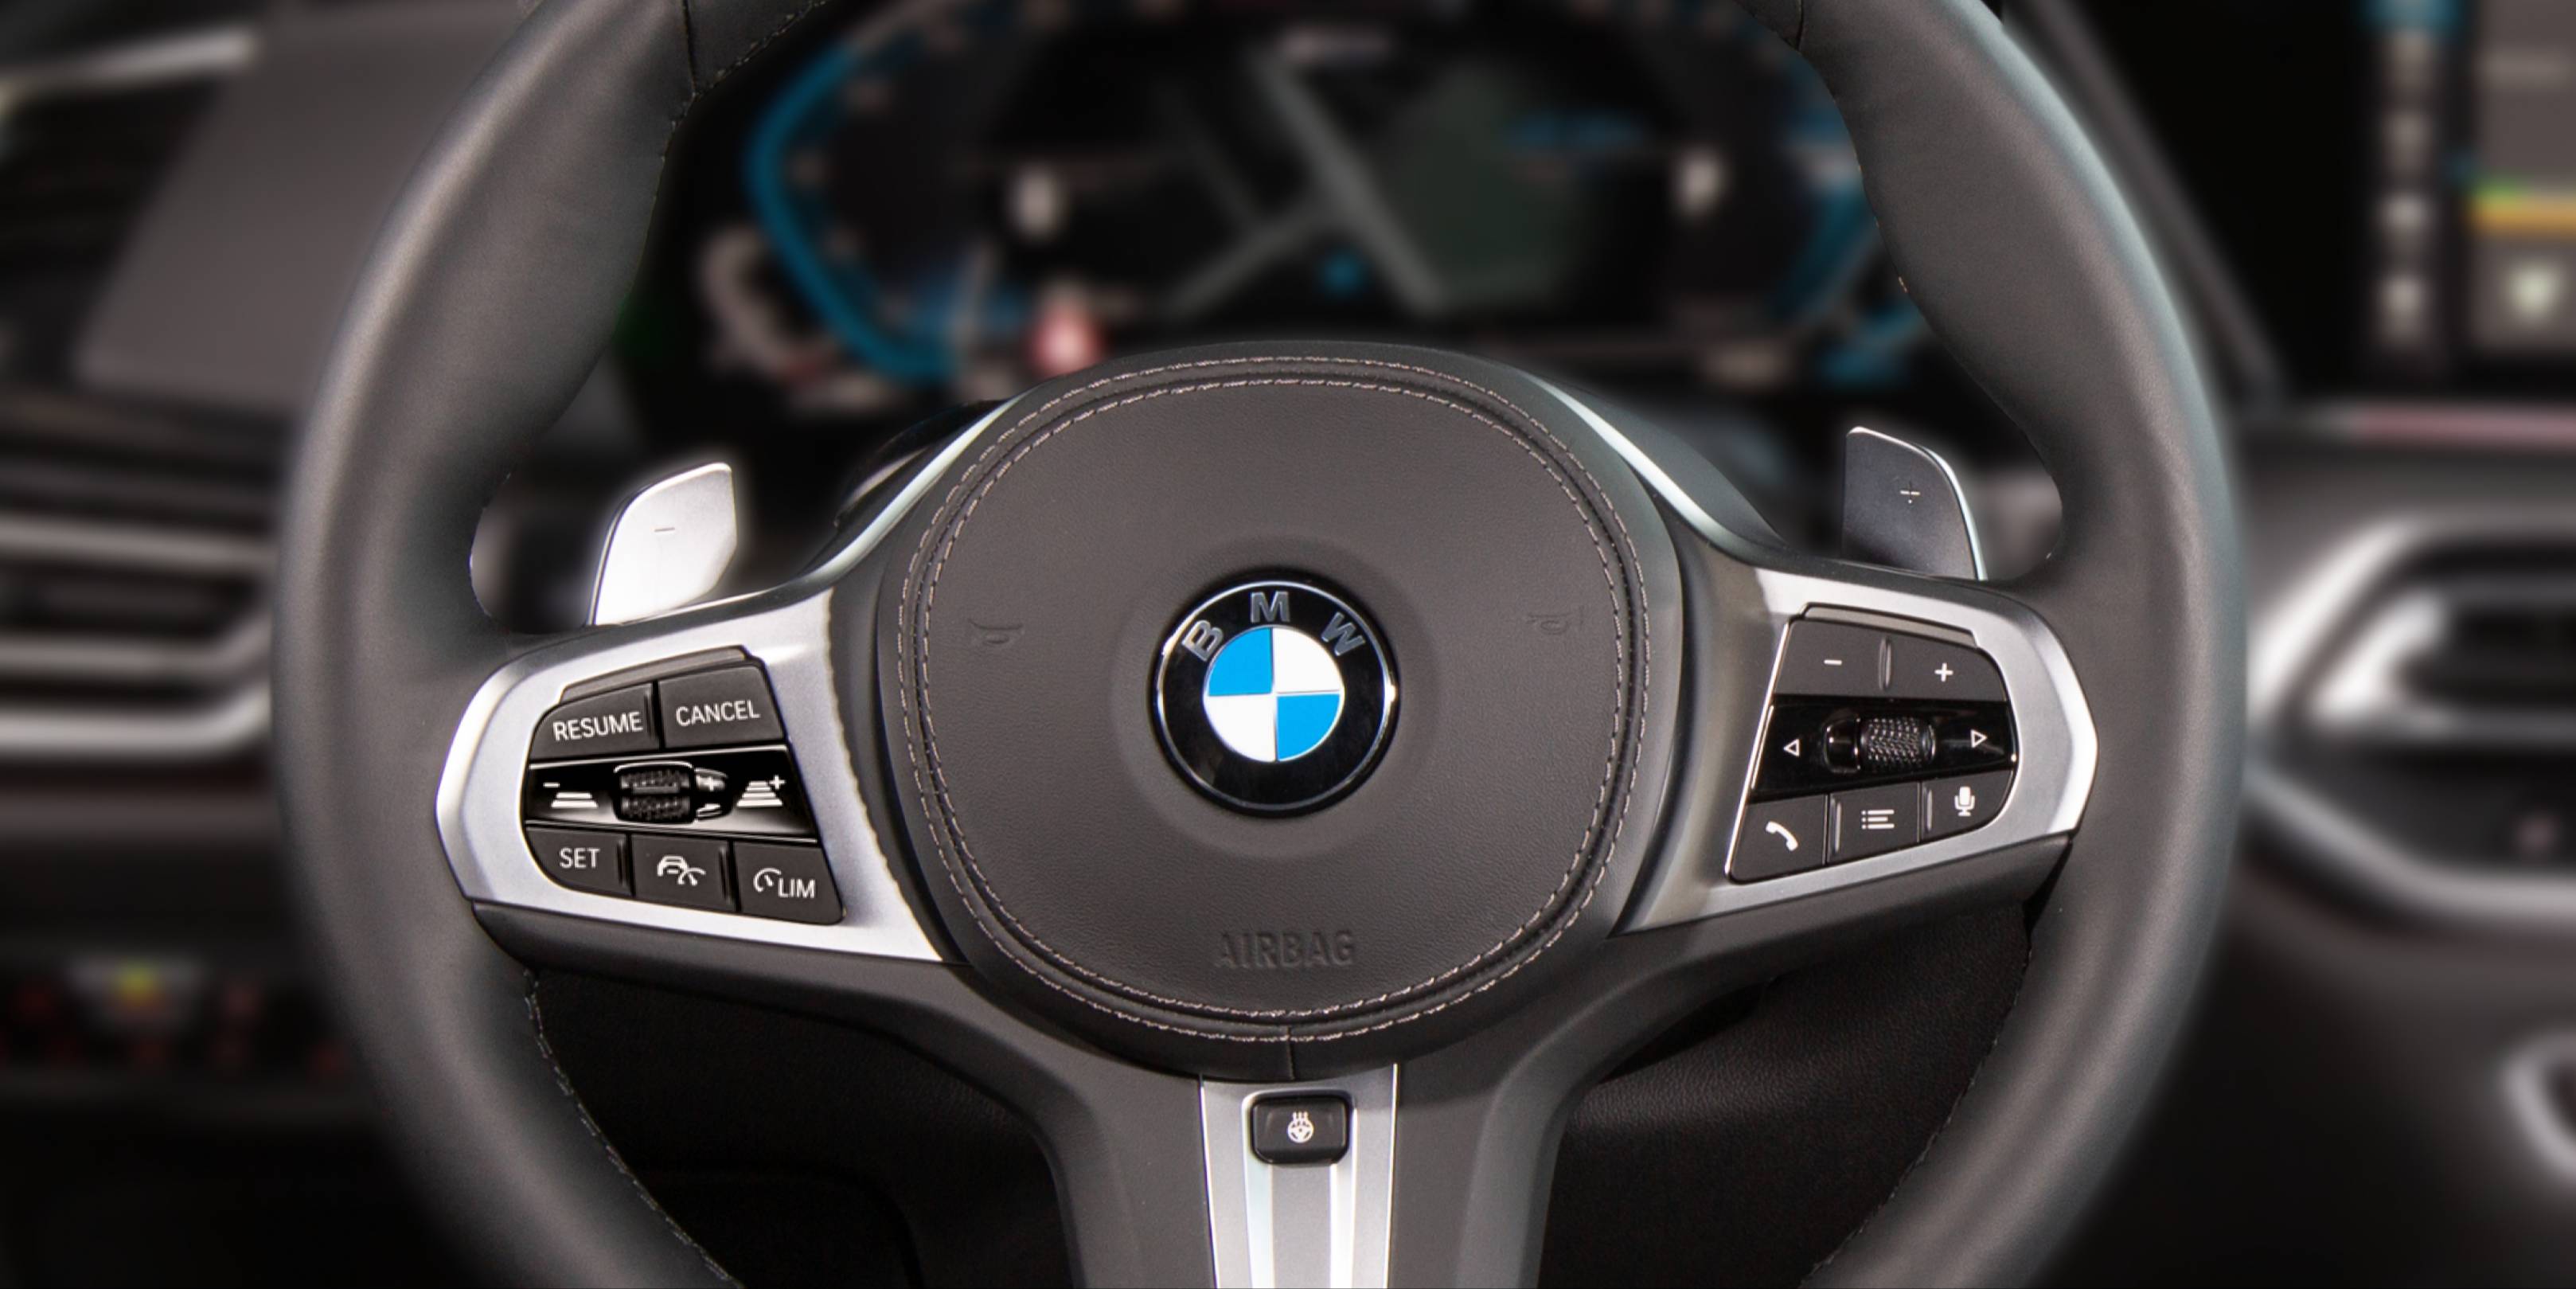 Heated steering wheel can now be set to come on automatically